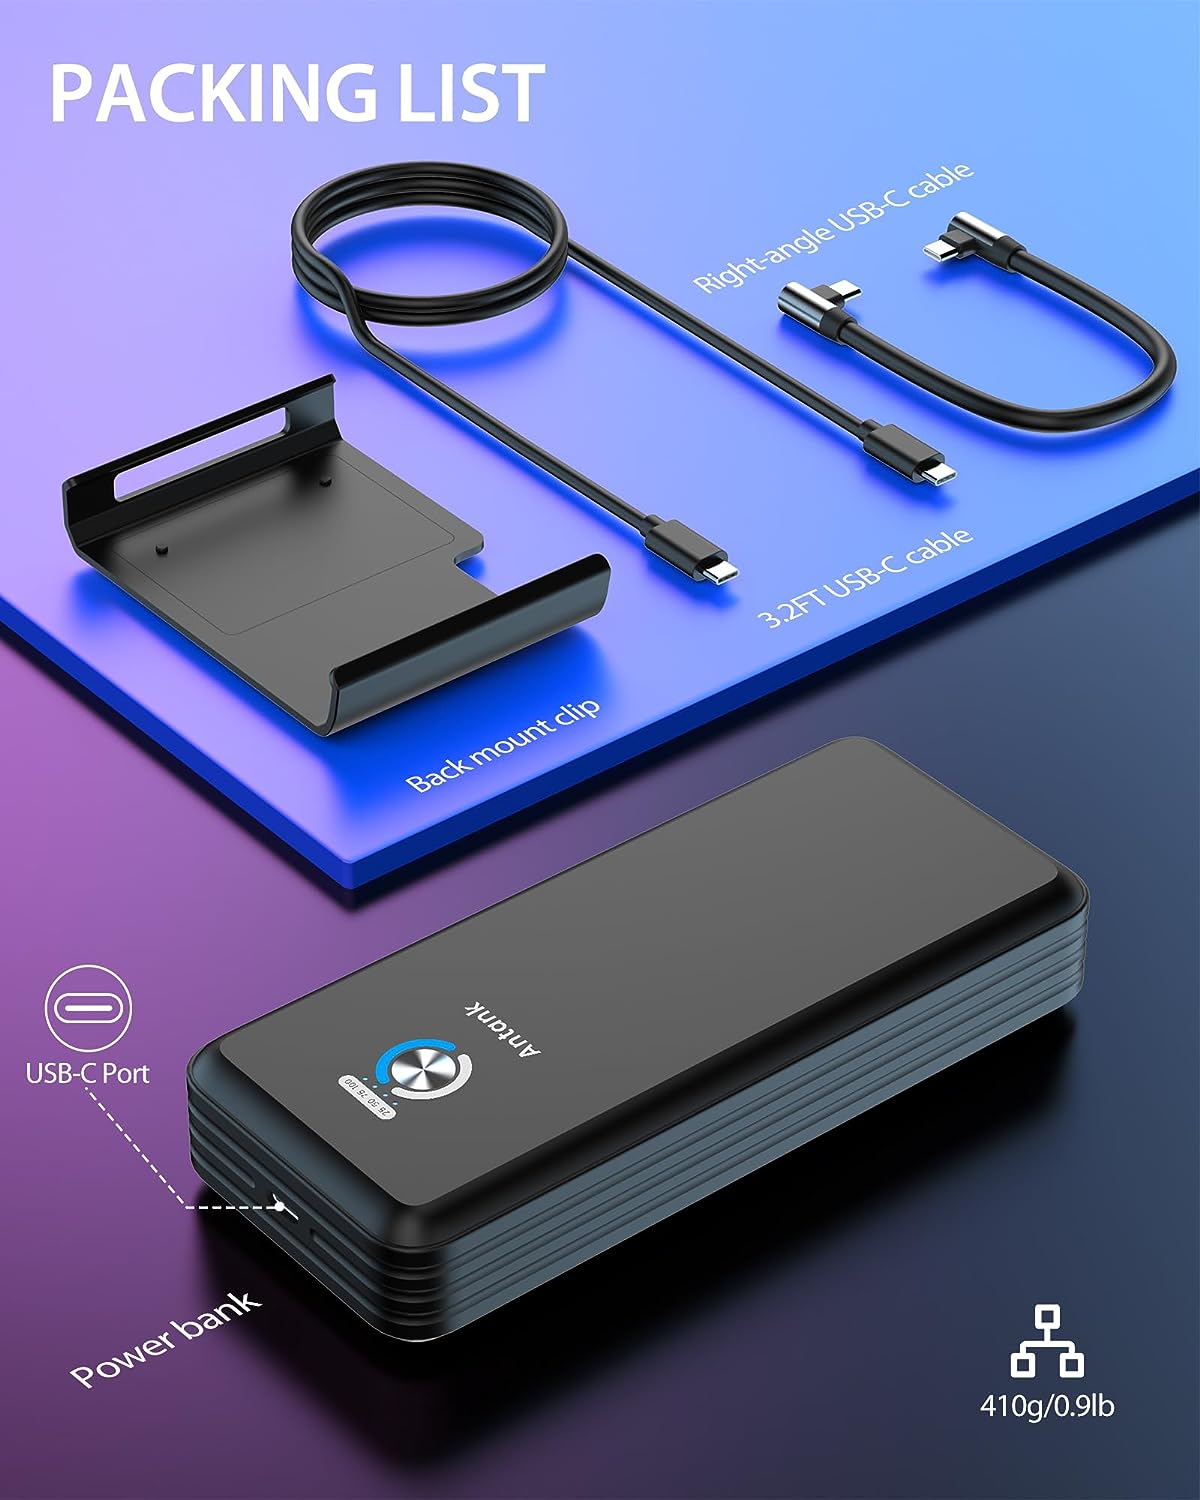 SteamDeck PowerBank: 16000mAh 45W PD 3.0 Fast Charging Portable with Removable Magnetic Back Mount